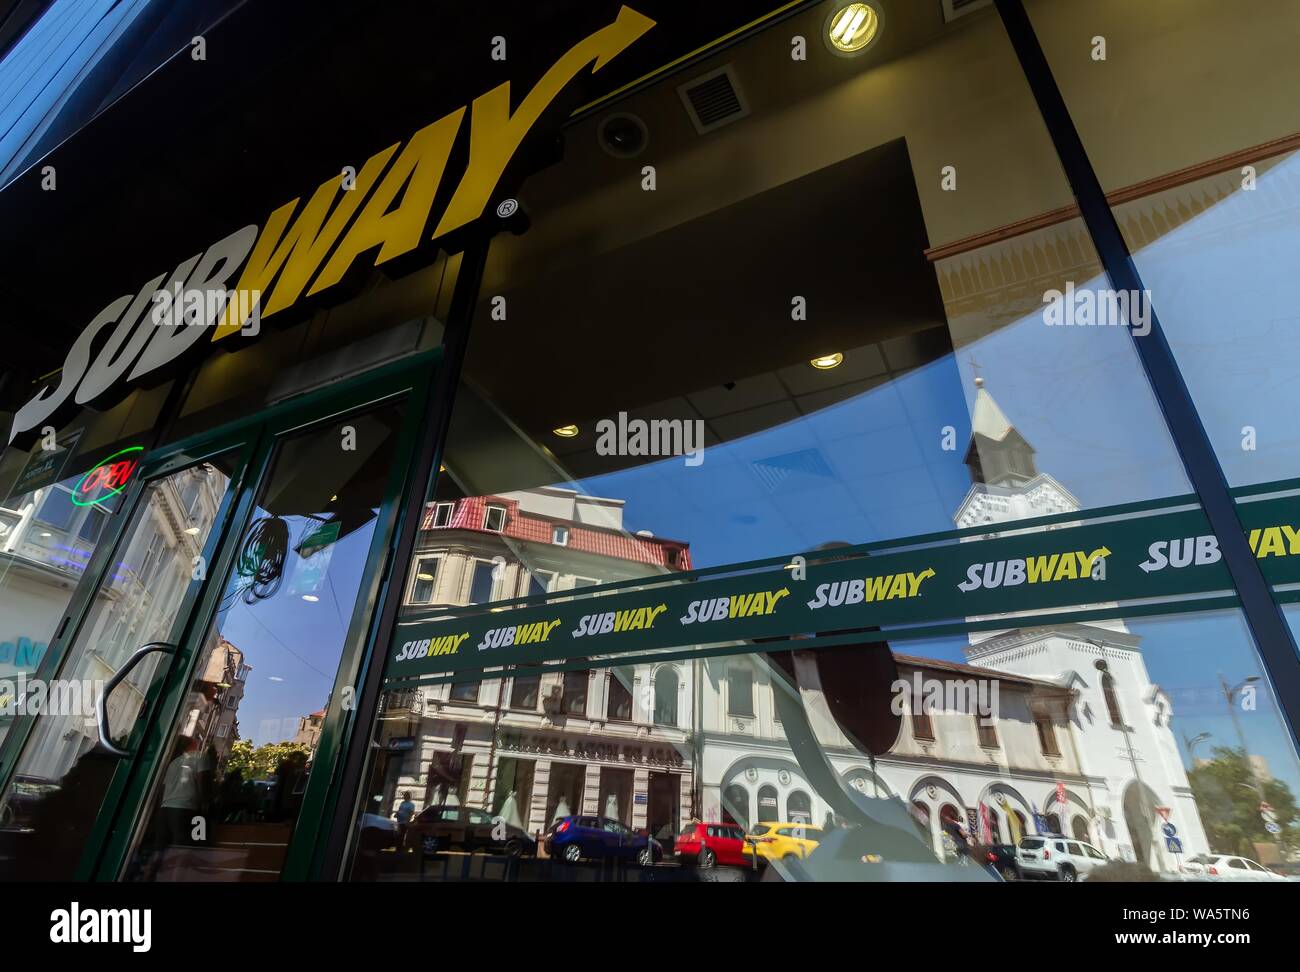 Bucharest, Romania - August 13, 2019: The Roman Catholic church 'Baratia', is seen in the reflection of the windows of a Subway fast food restaurant i Stock Photo